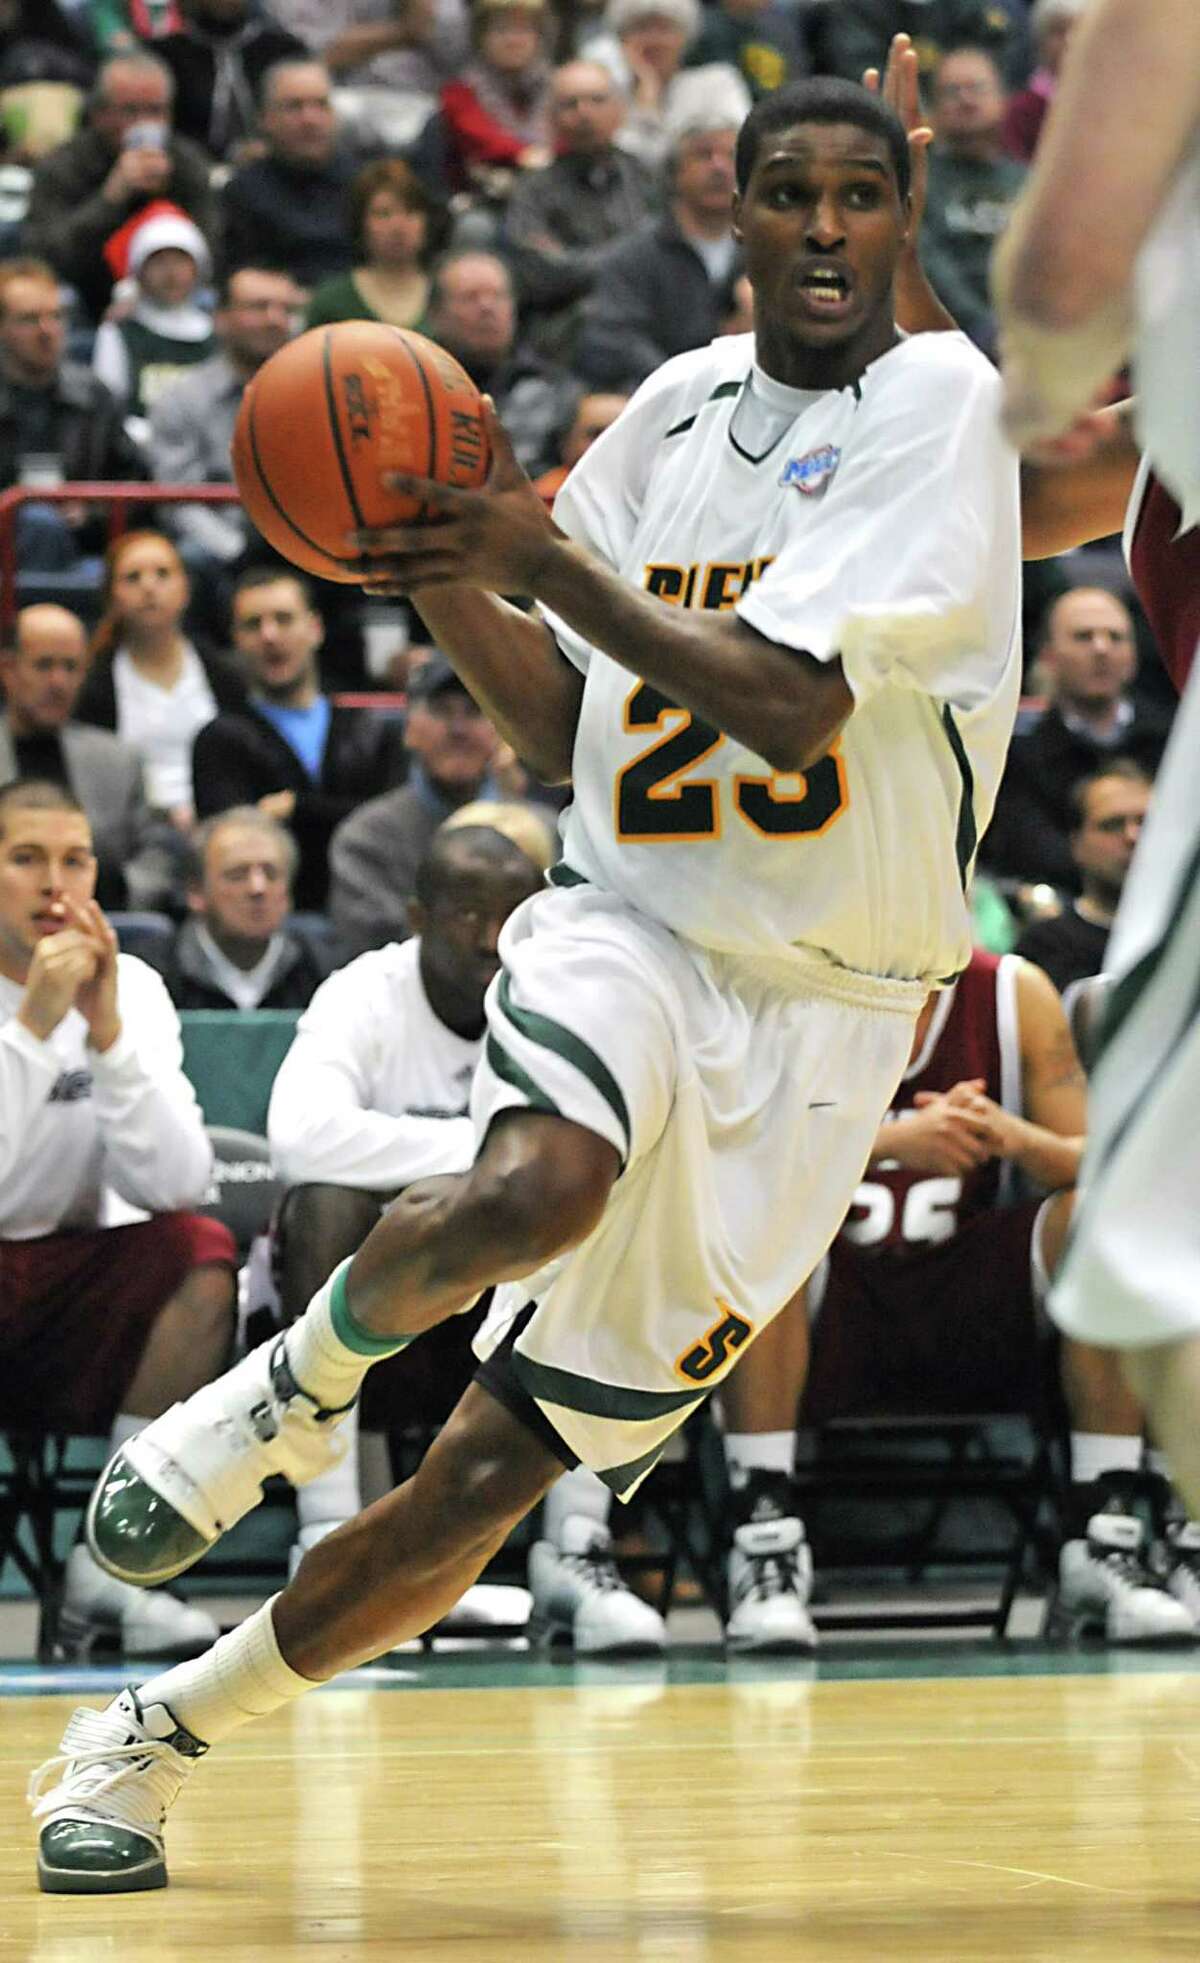 Siena's Edwin Ubiles drives to the basket during a basketball game against Rider at the Times Union Center in Albany, NY on December 23, 2009. (Lori Van Buren / Times Union)